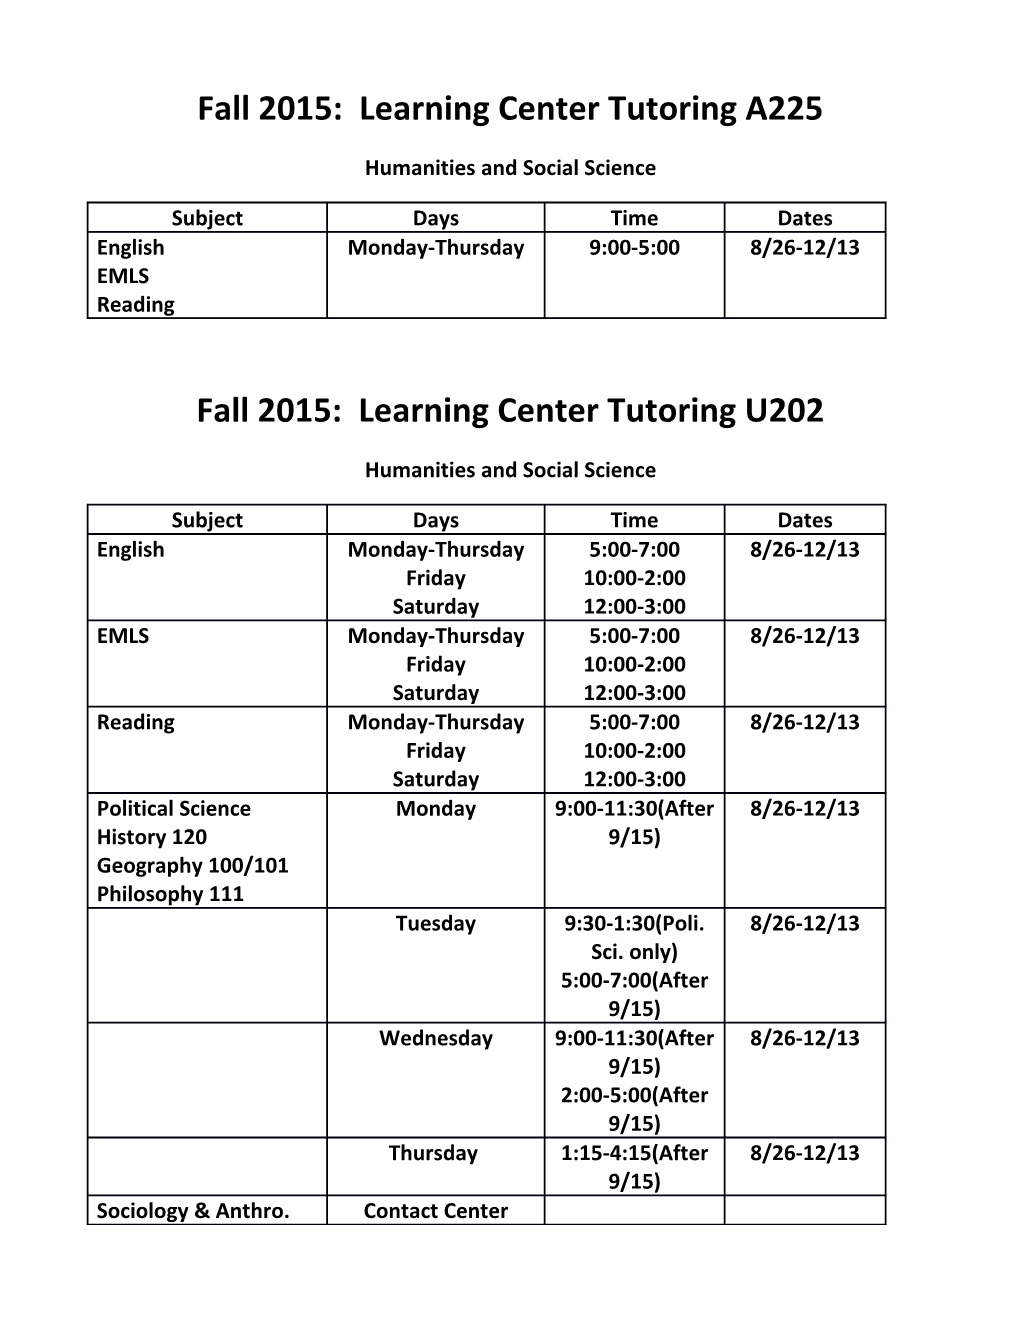 Fall 2015: Learning Center Tutoring A225